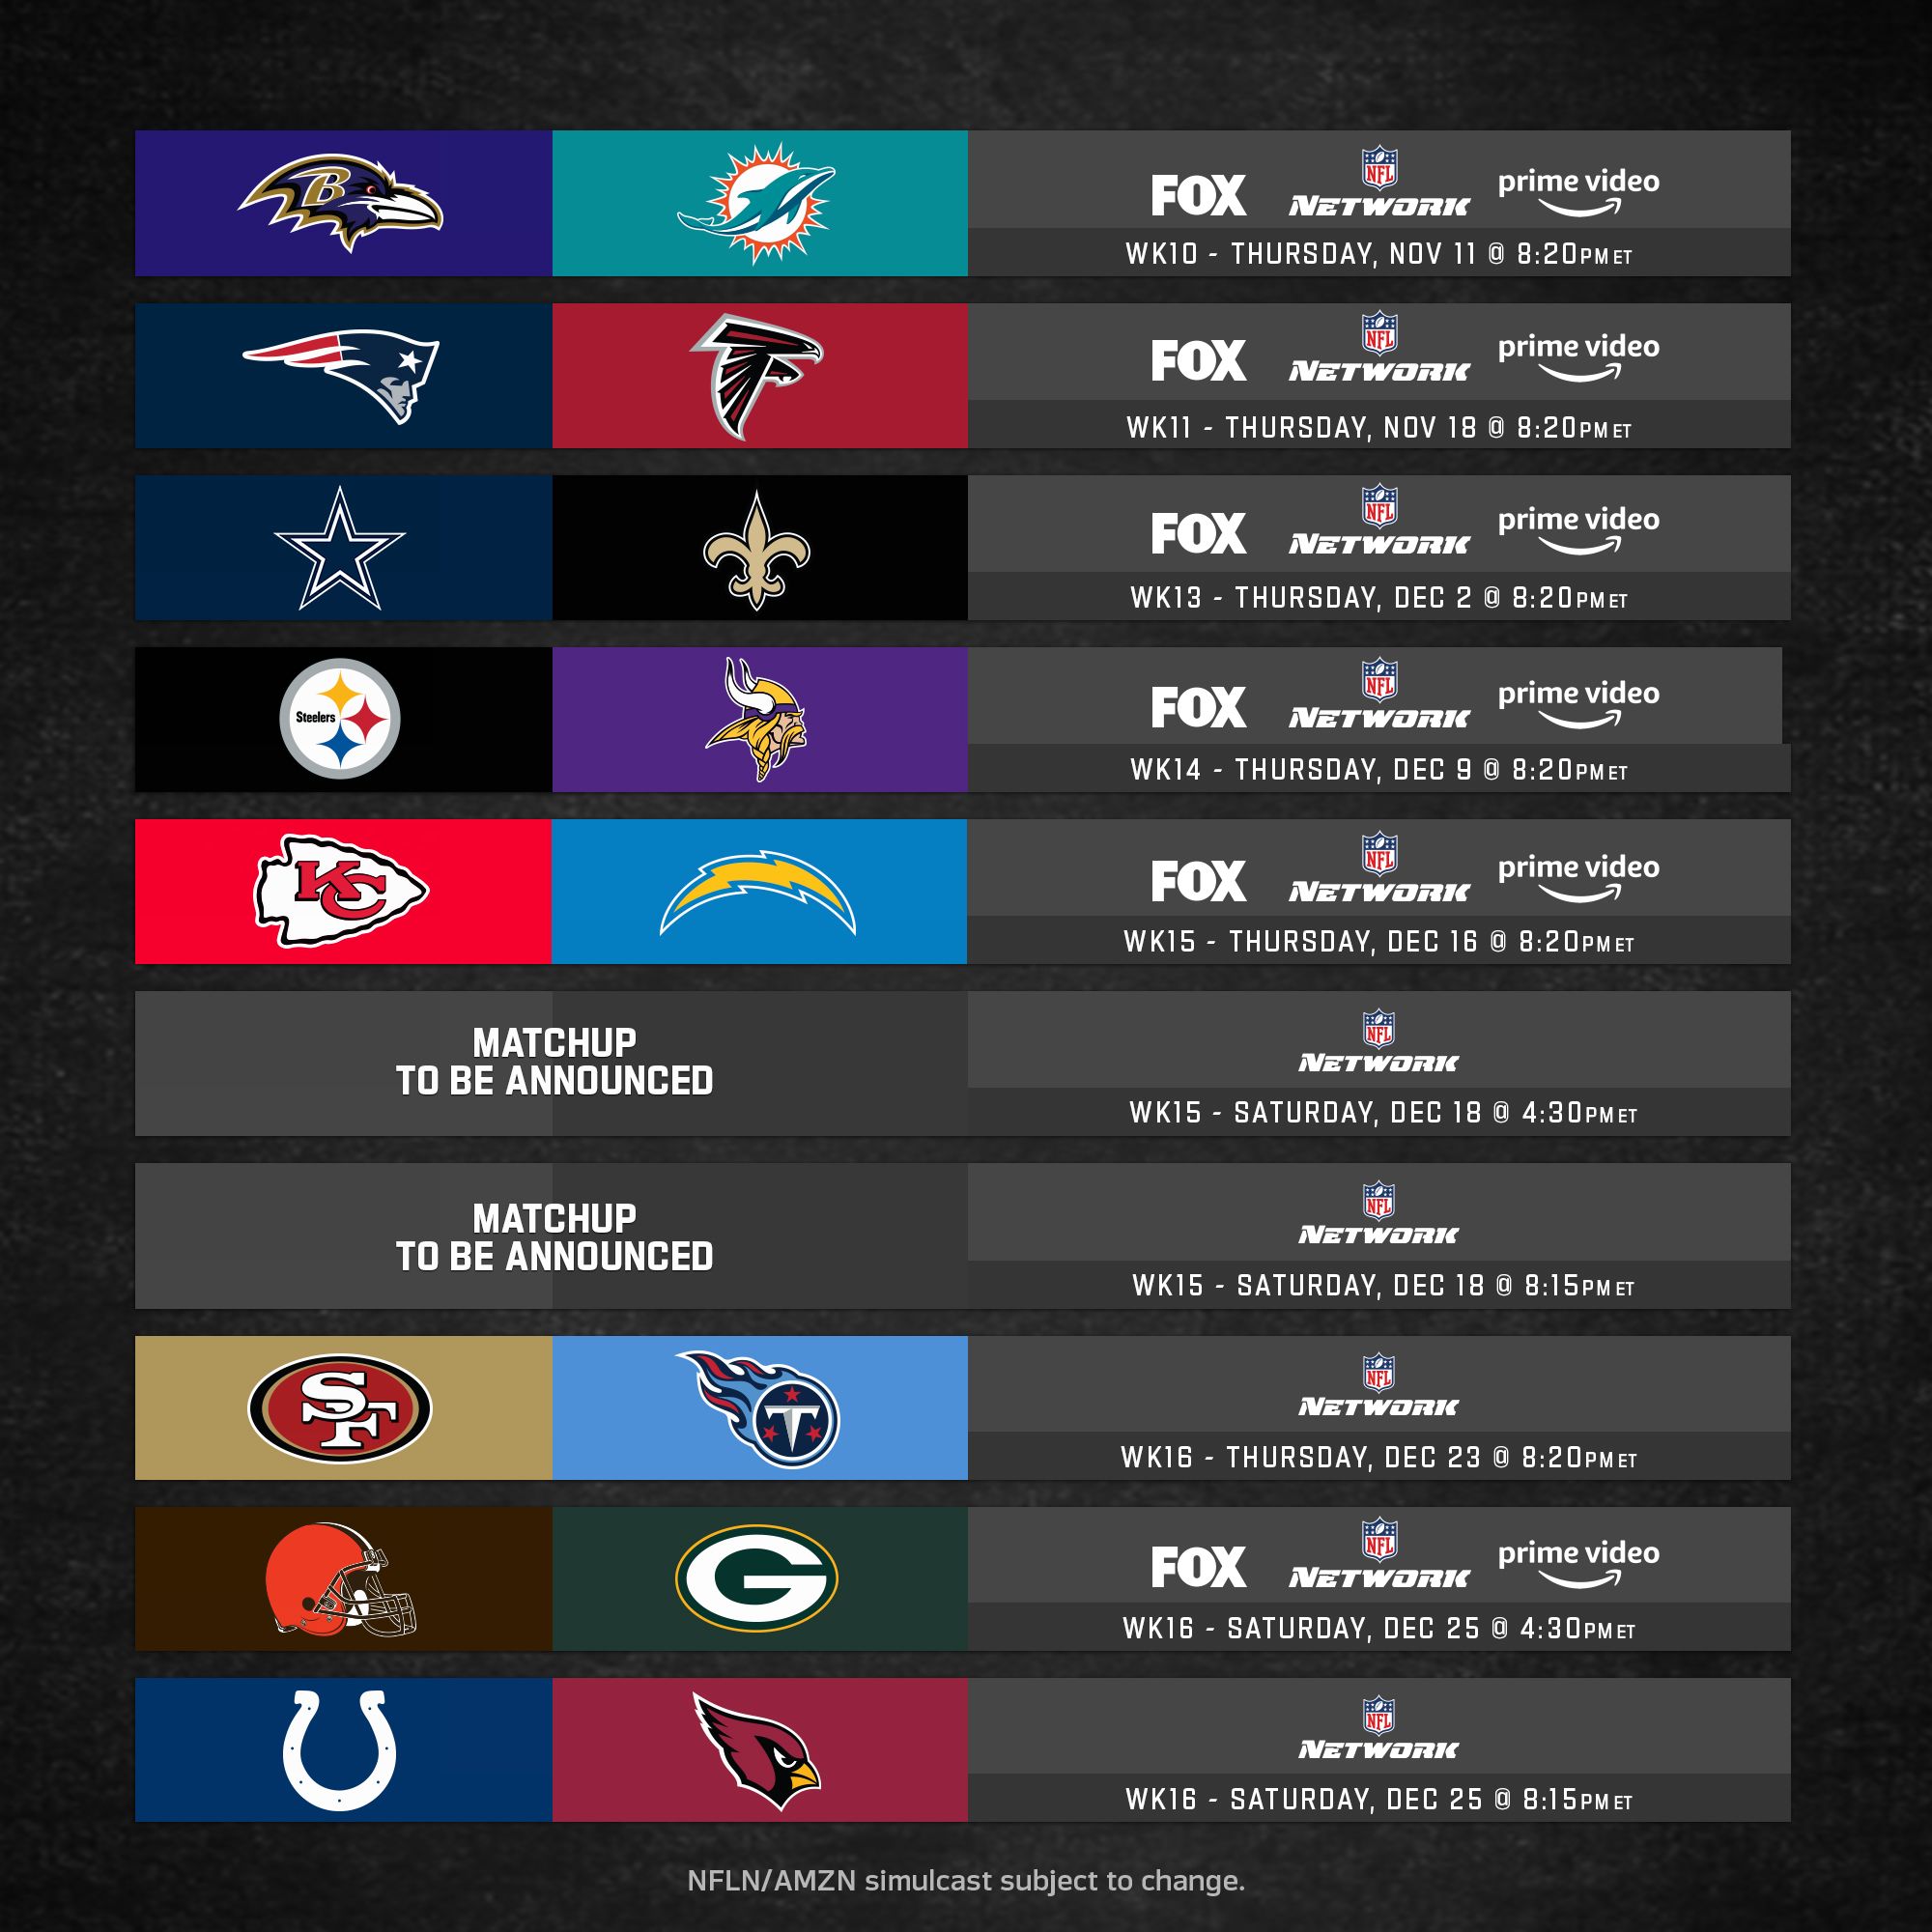 games for tomorrow nfl